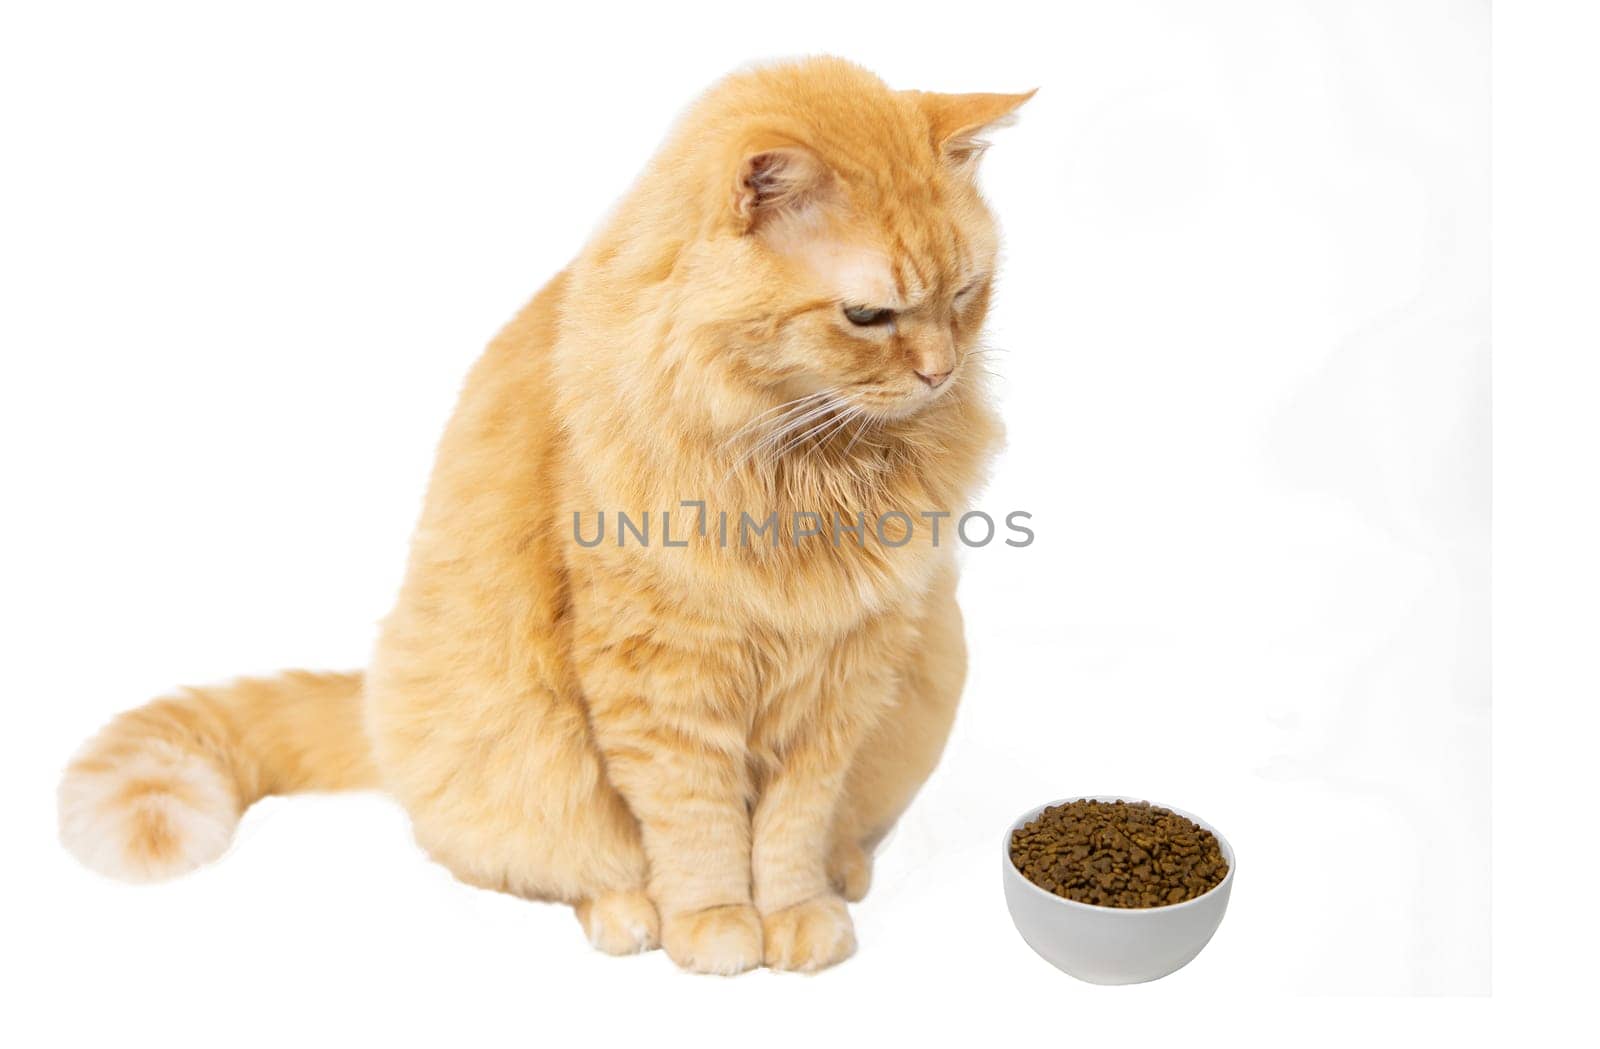 A cream-colored cat looks carefully at a ceramic bowl full of dry food.